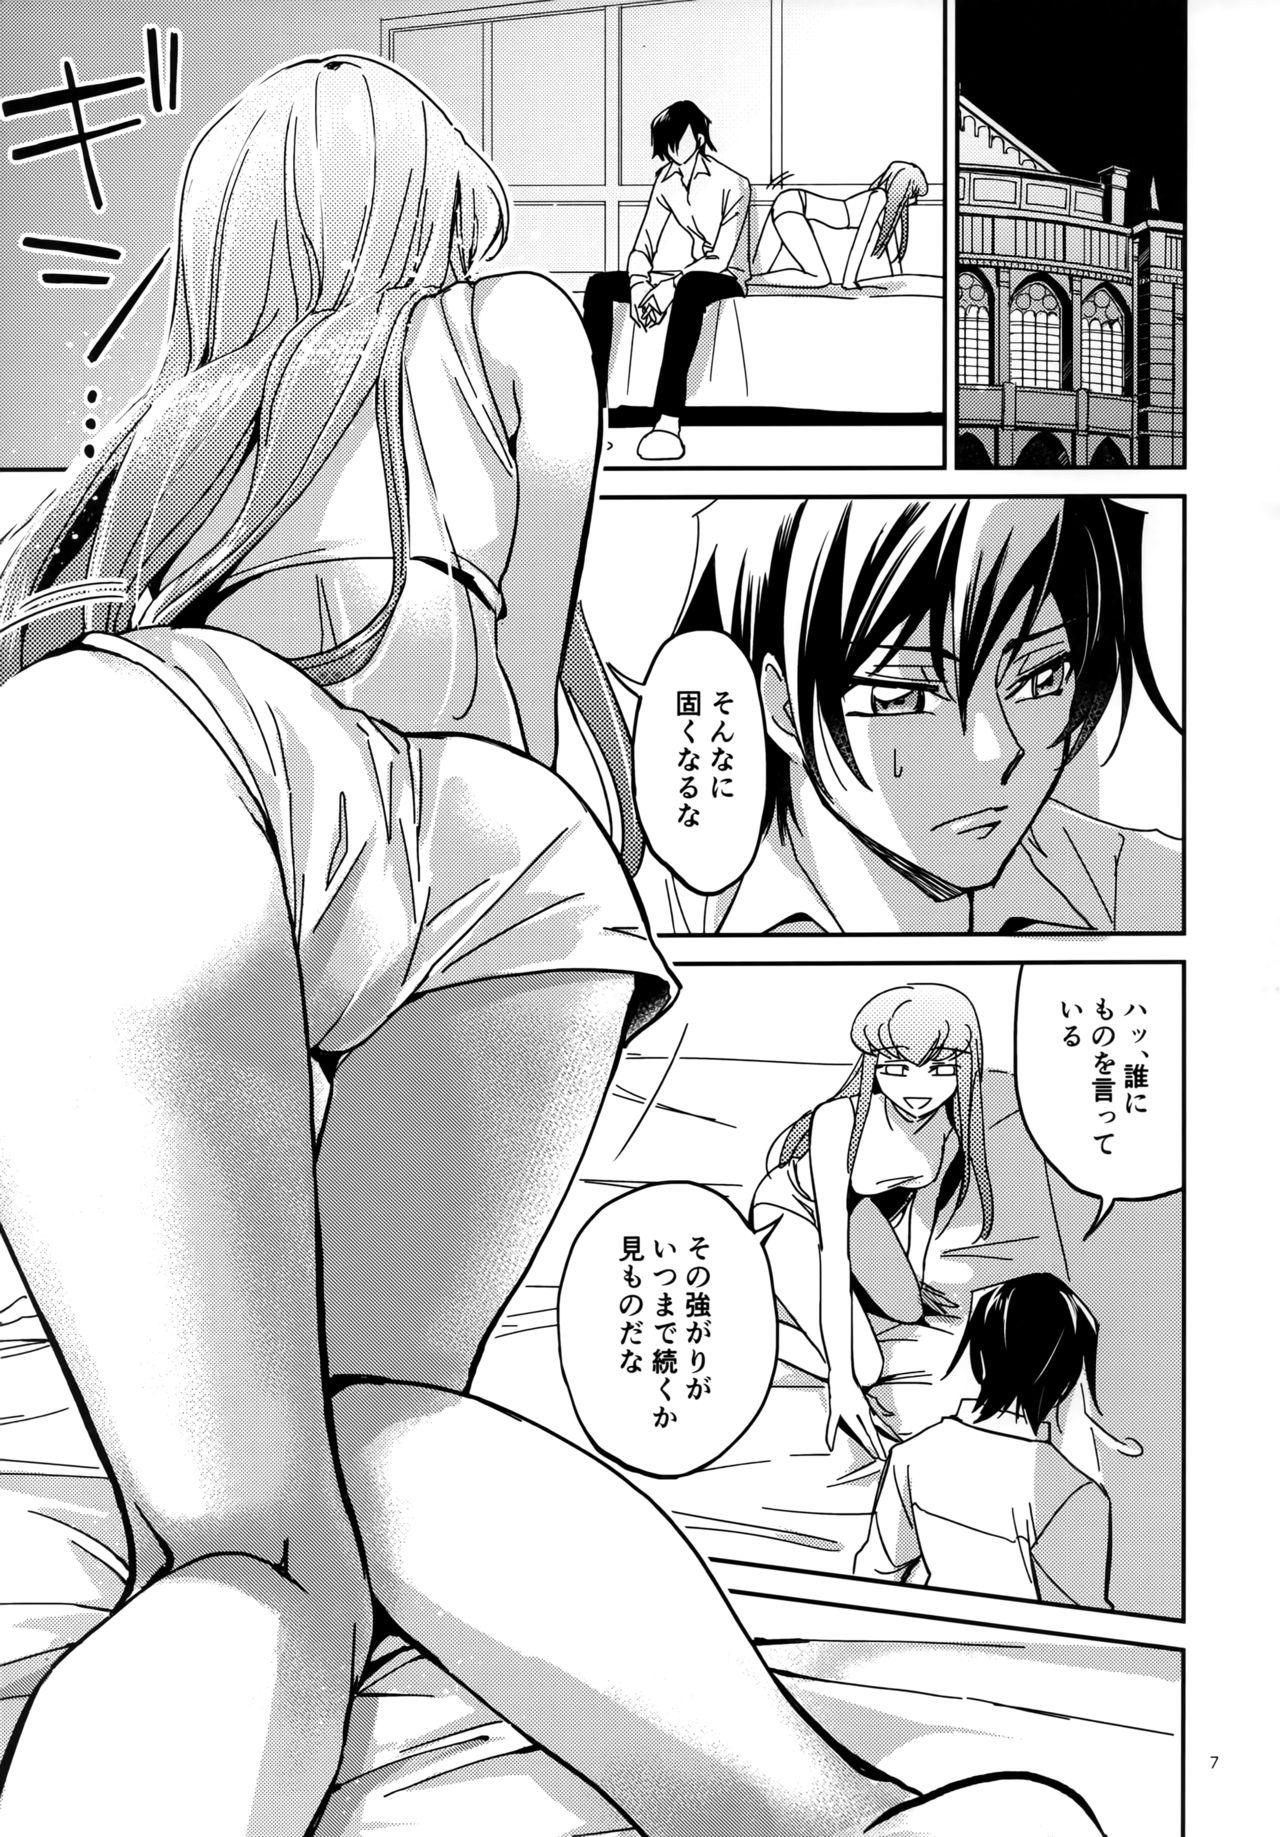 Shecock Place of Love - Code geass Asians - Page 6